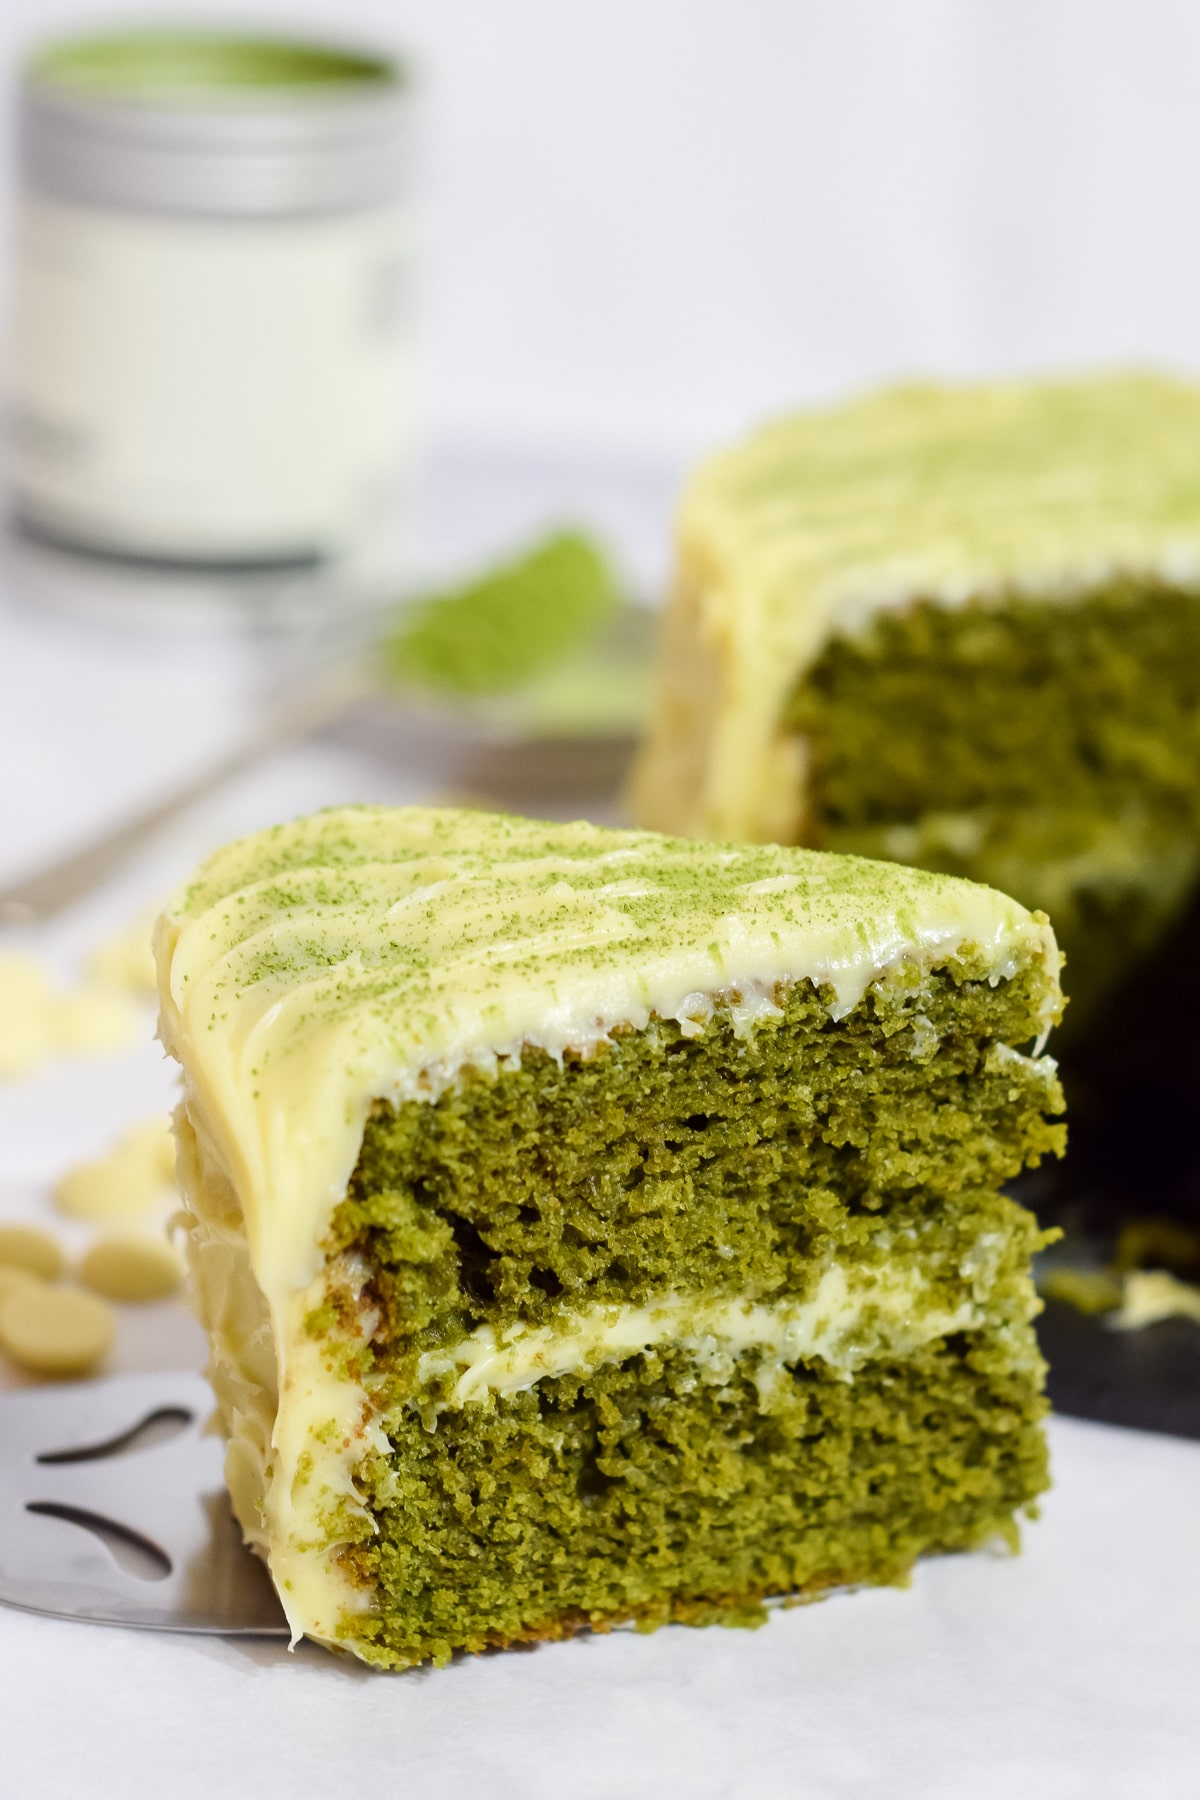 MATCHA WHITE CHOCOLATE CAKE easy green desserts for St Patricks Day. Get tons of dessert ideas from decadent, no bake, easy, vegan and green!